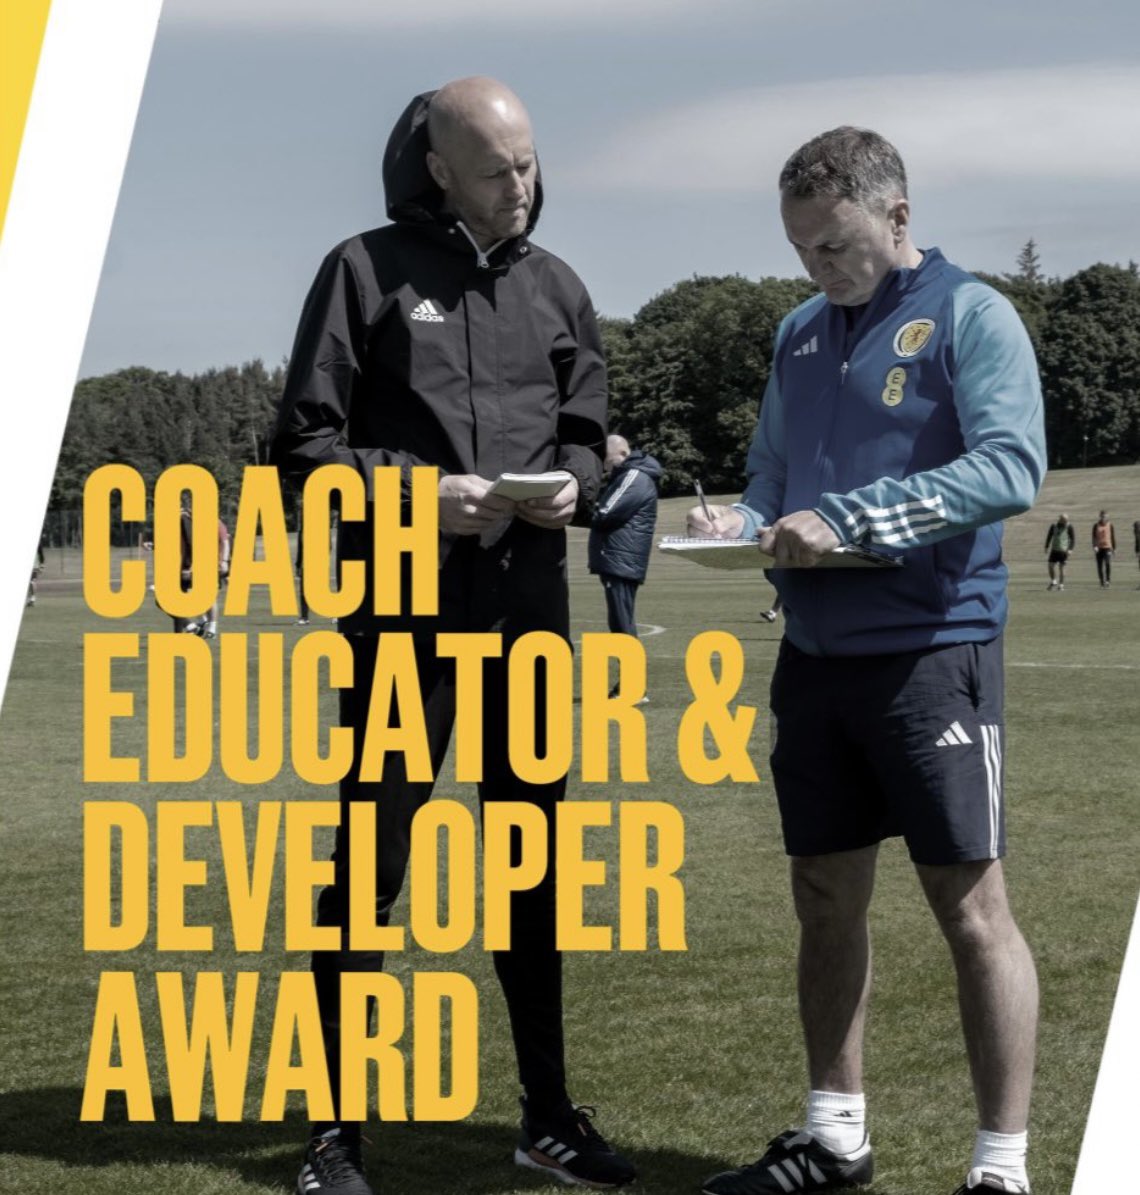 Buzzing to have been accepted onto the Coach Educator and Developer Award. Looking forward to further development and getting started🌟
#ScottishFACoachEd